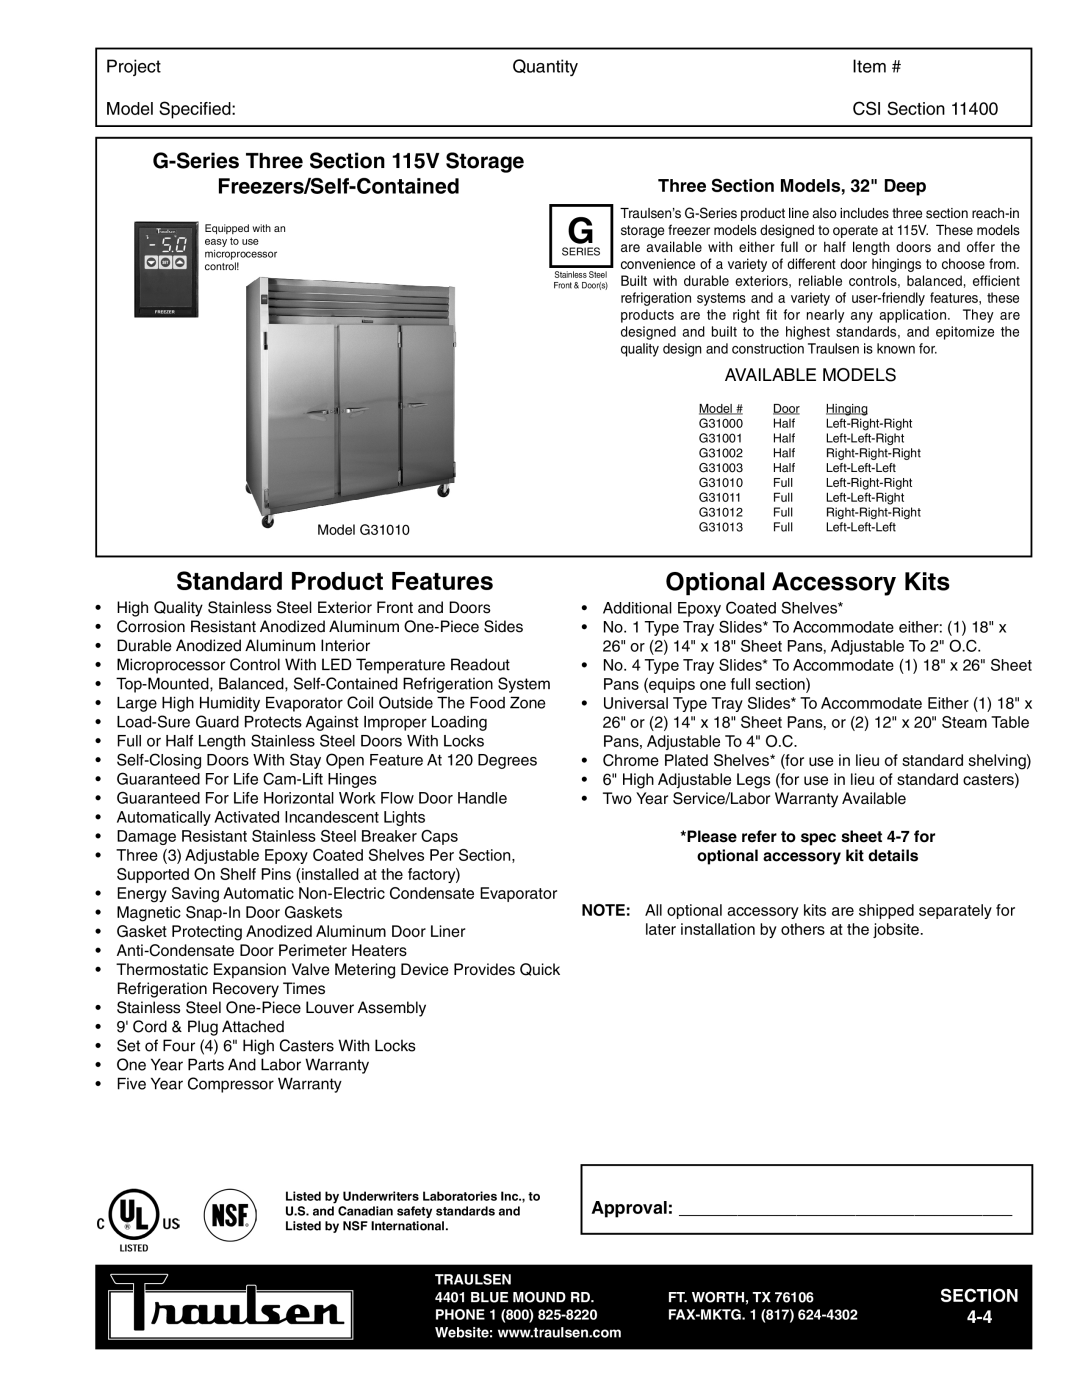 Traulsen G31010 warranty G-SeriesThree V Storage, Freezers/Self-Contained, Project, Quantity, Item #, Model Specified 